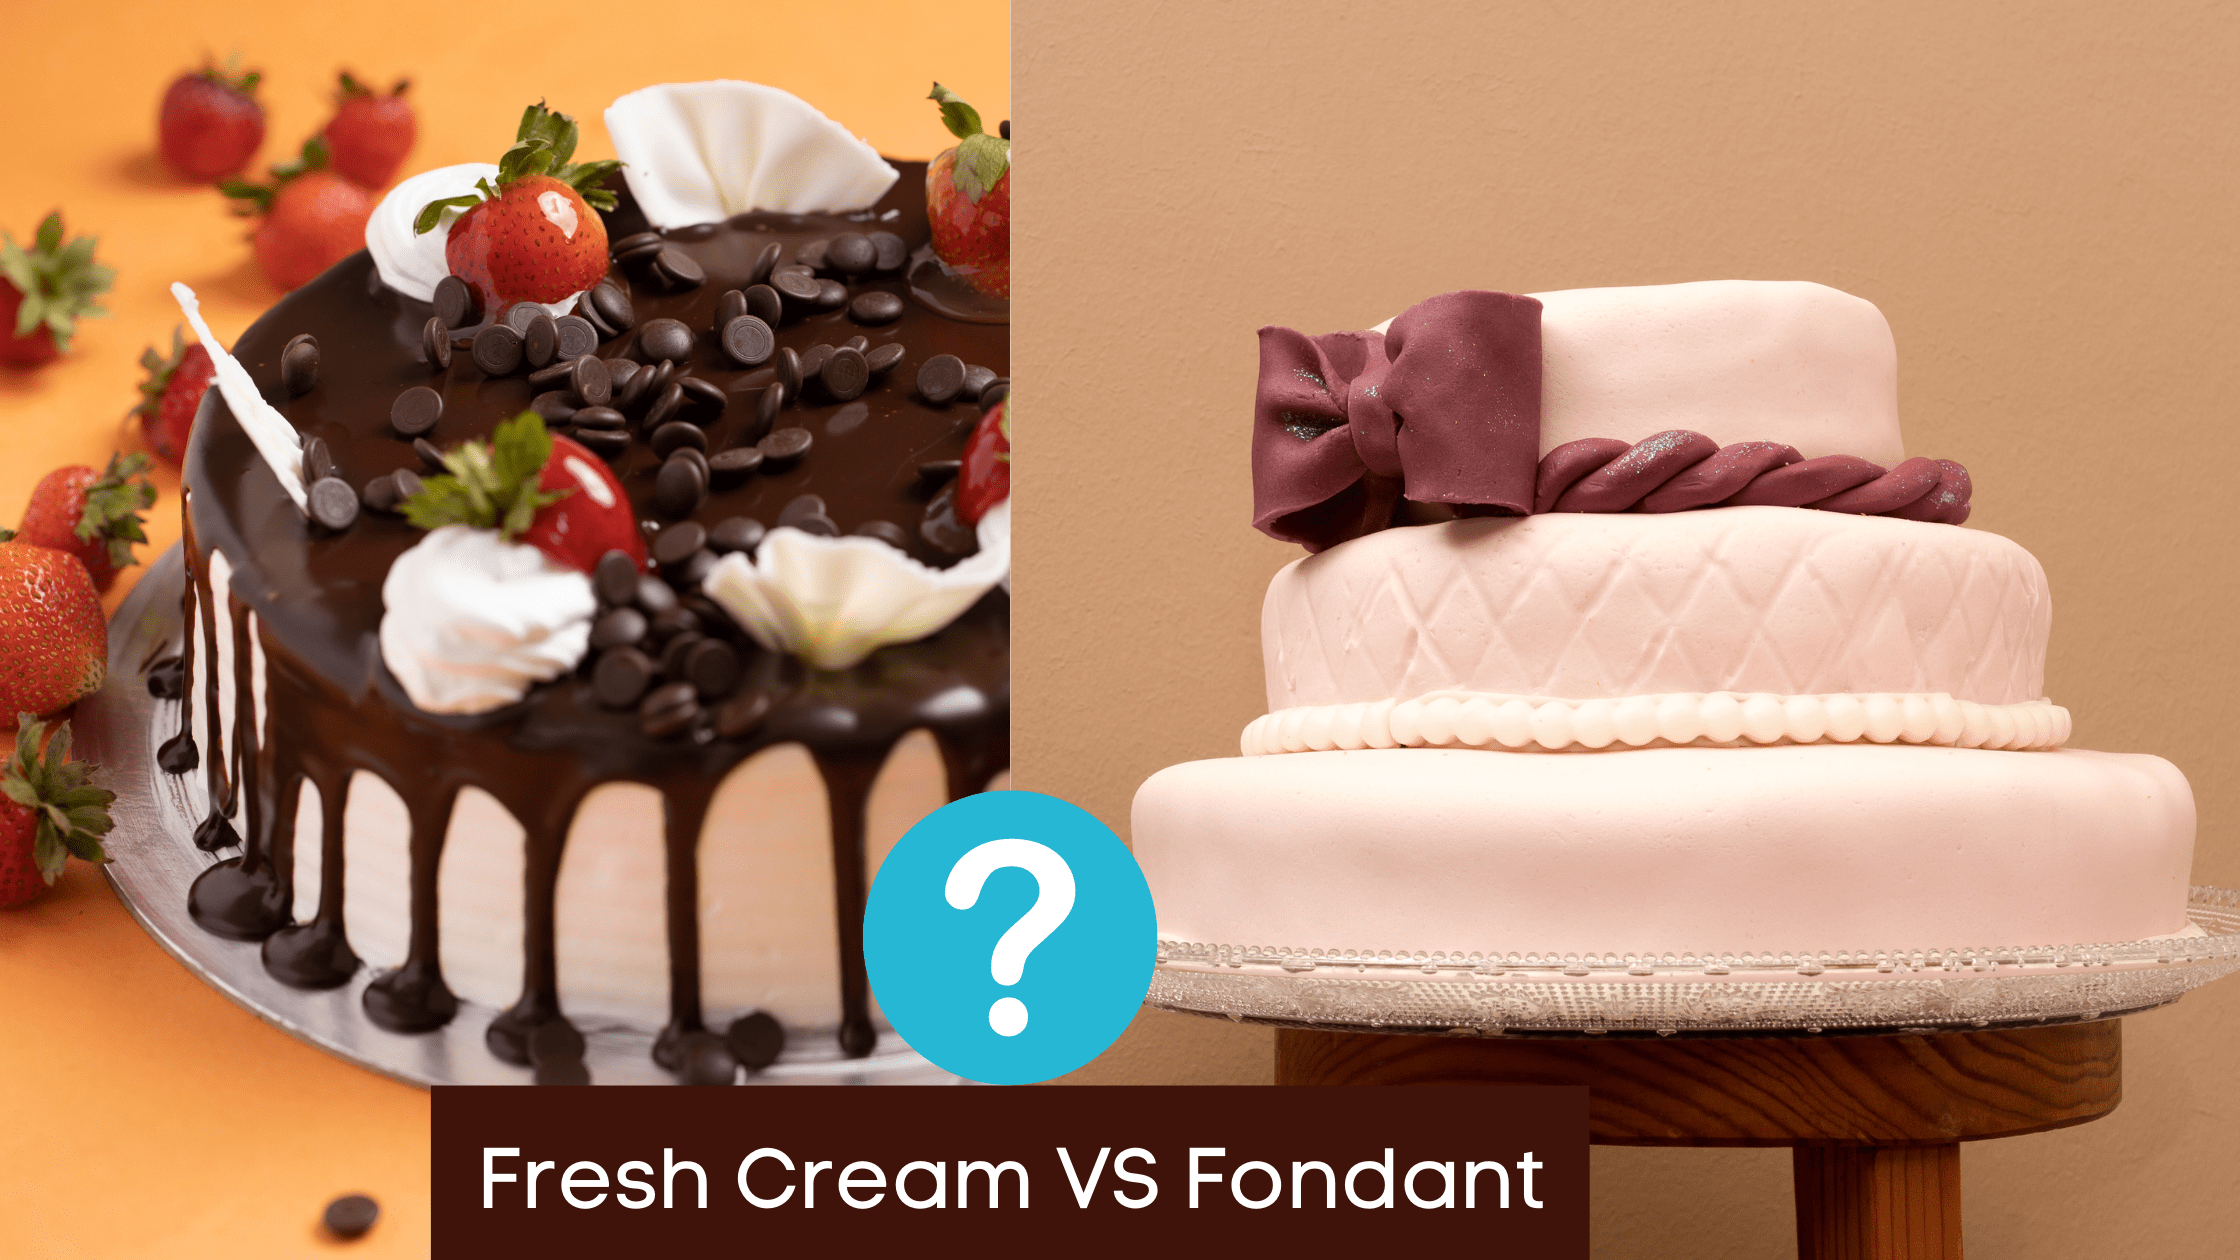 Confusion with Fondant V/S Fresh Cream? Here is the guide to choose the best one!